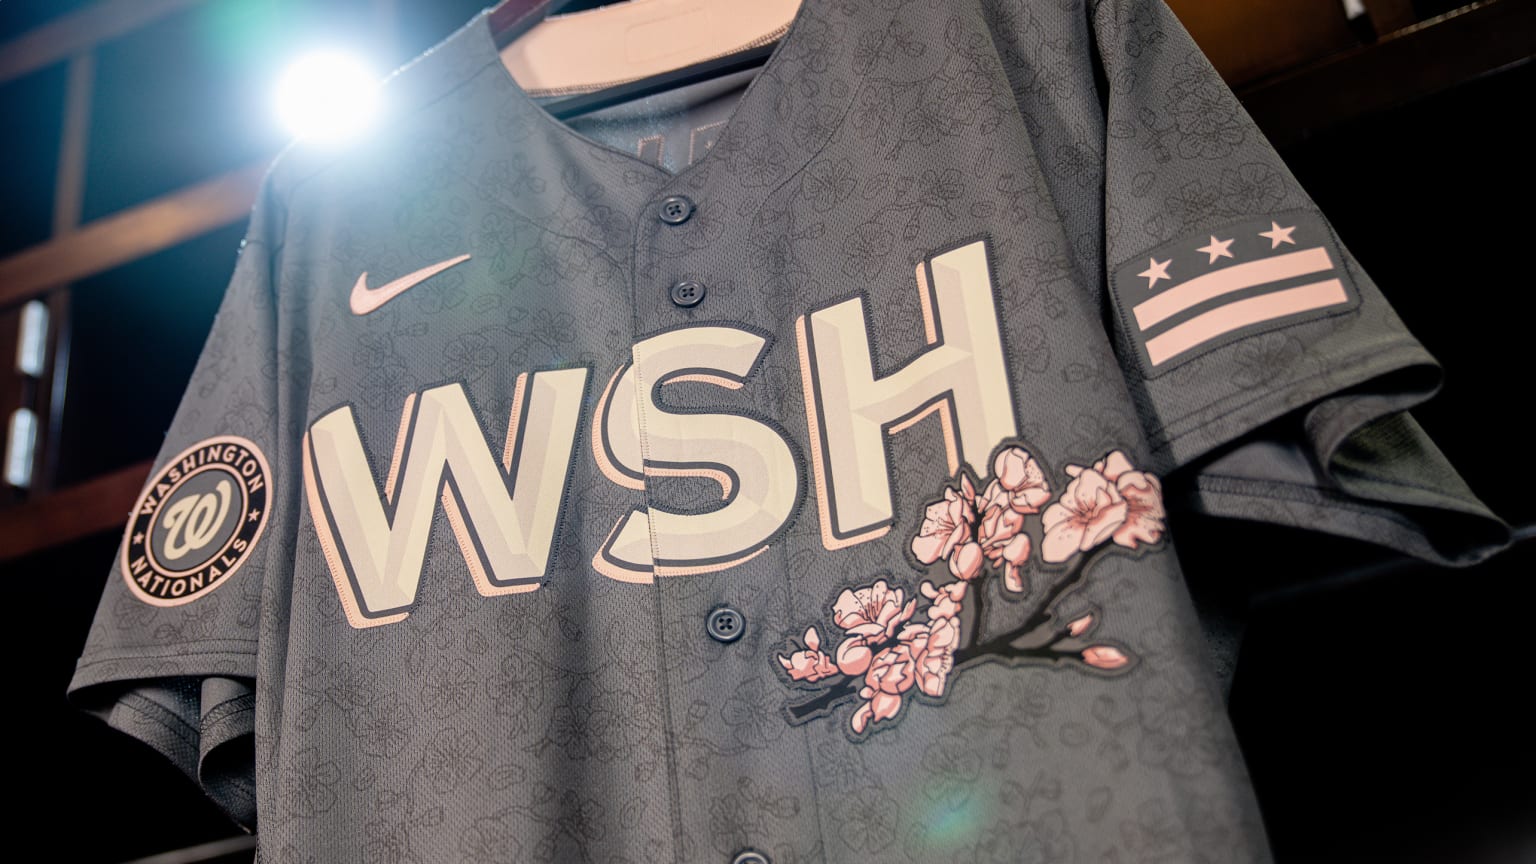 MLB - The D.C. Cherry Blossoms have arrived early this year! 🌸 The Washington  Nationals City Connect jerseys are here!